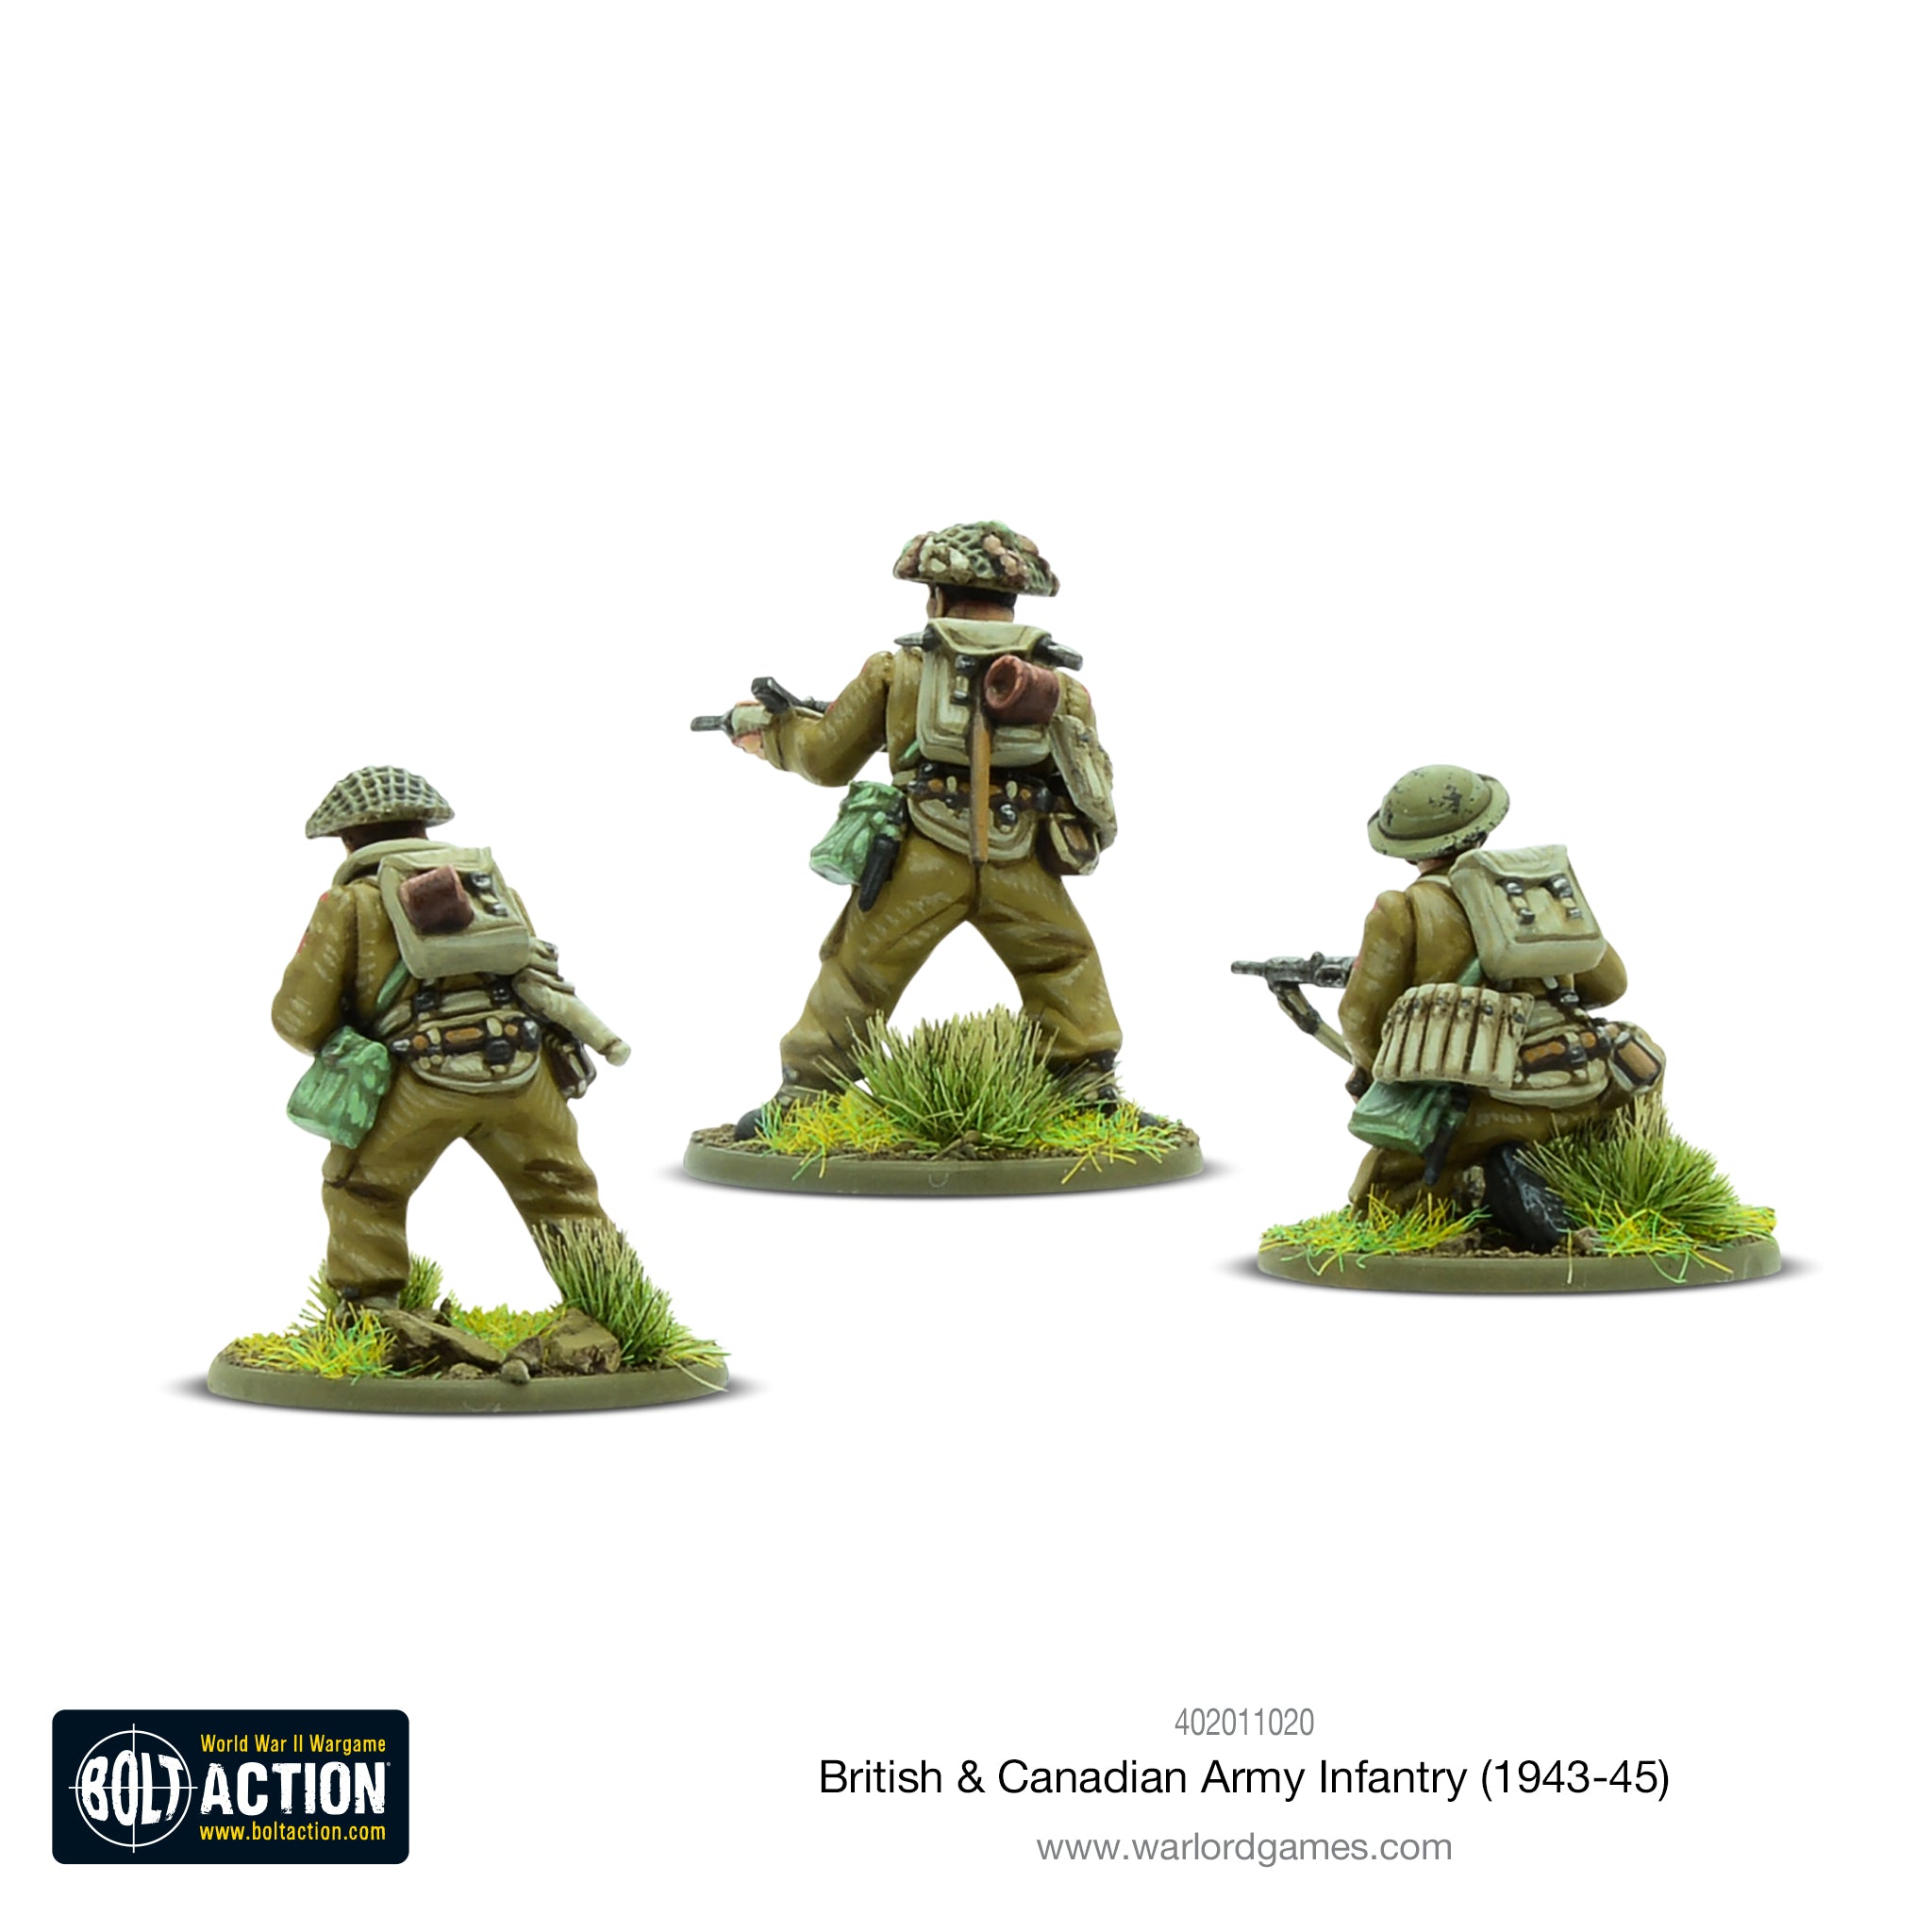 British & Canadian Army infantry (1943-45)